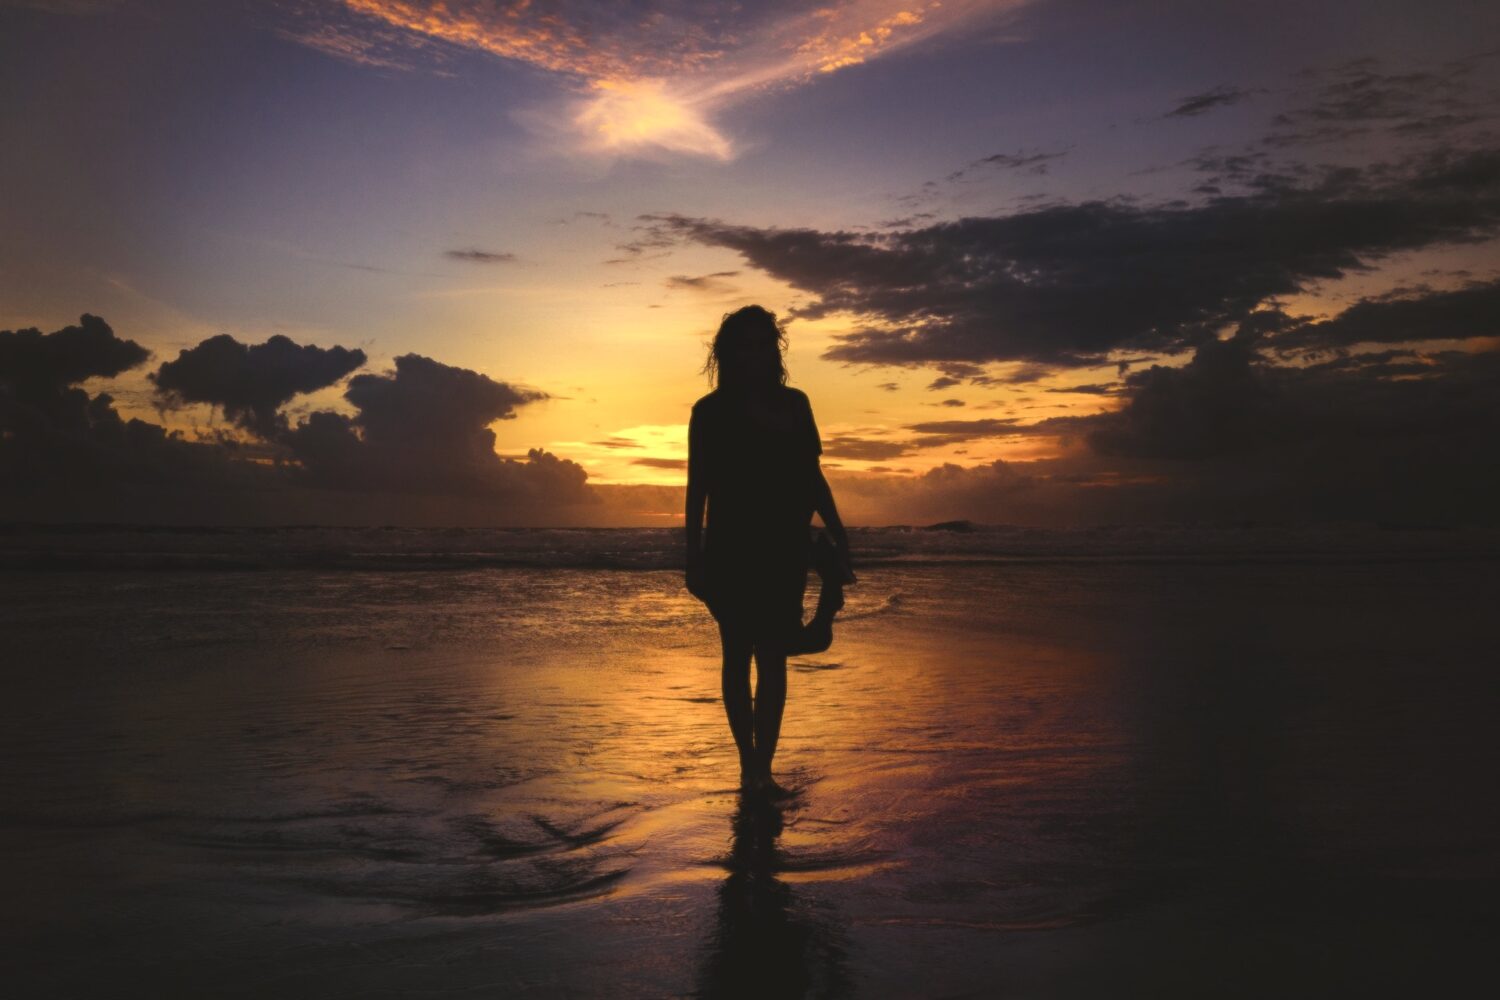 A silhouette of a person standing in the shorebreak at the beach looking out to a sunset